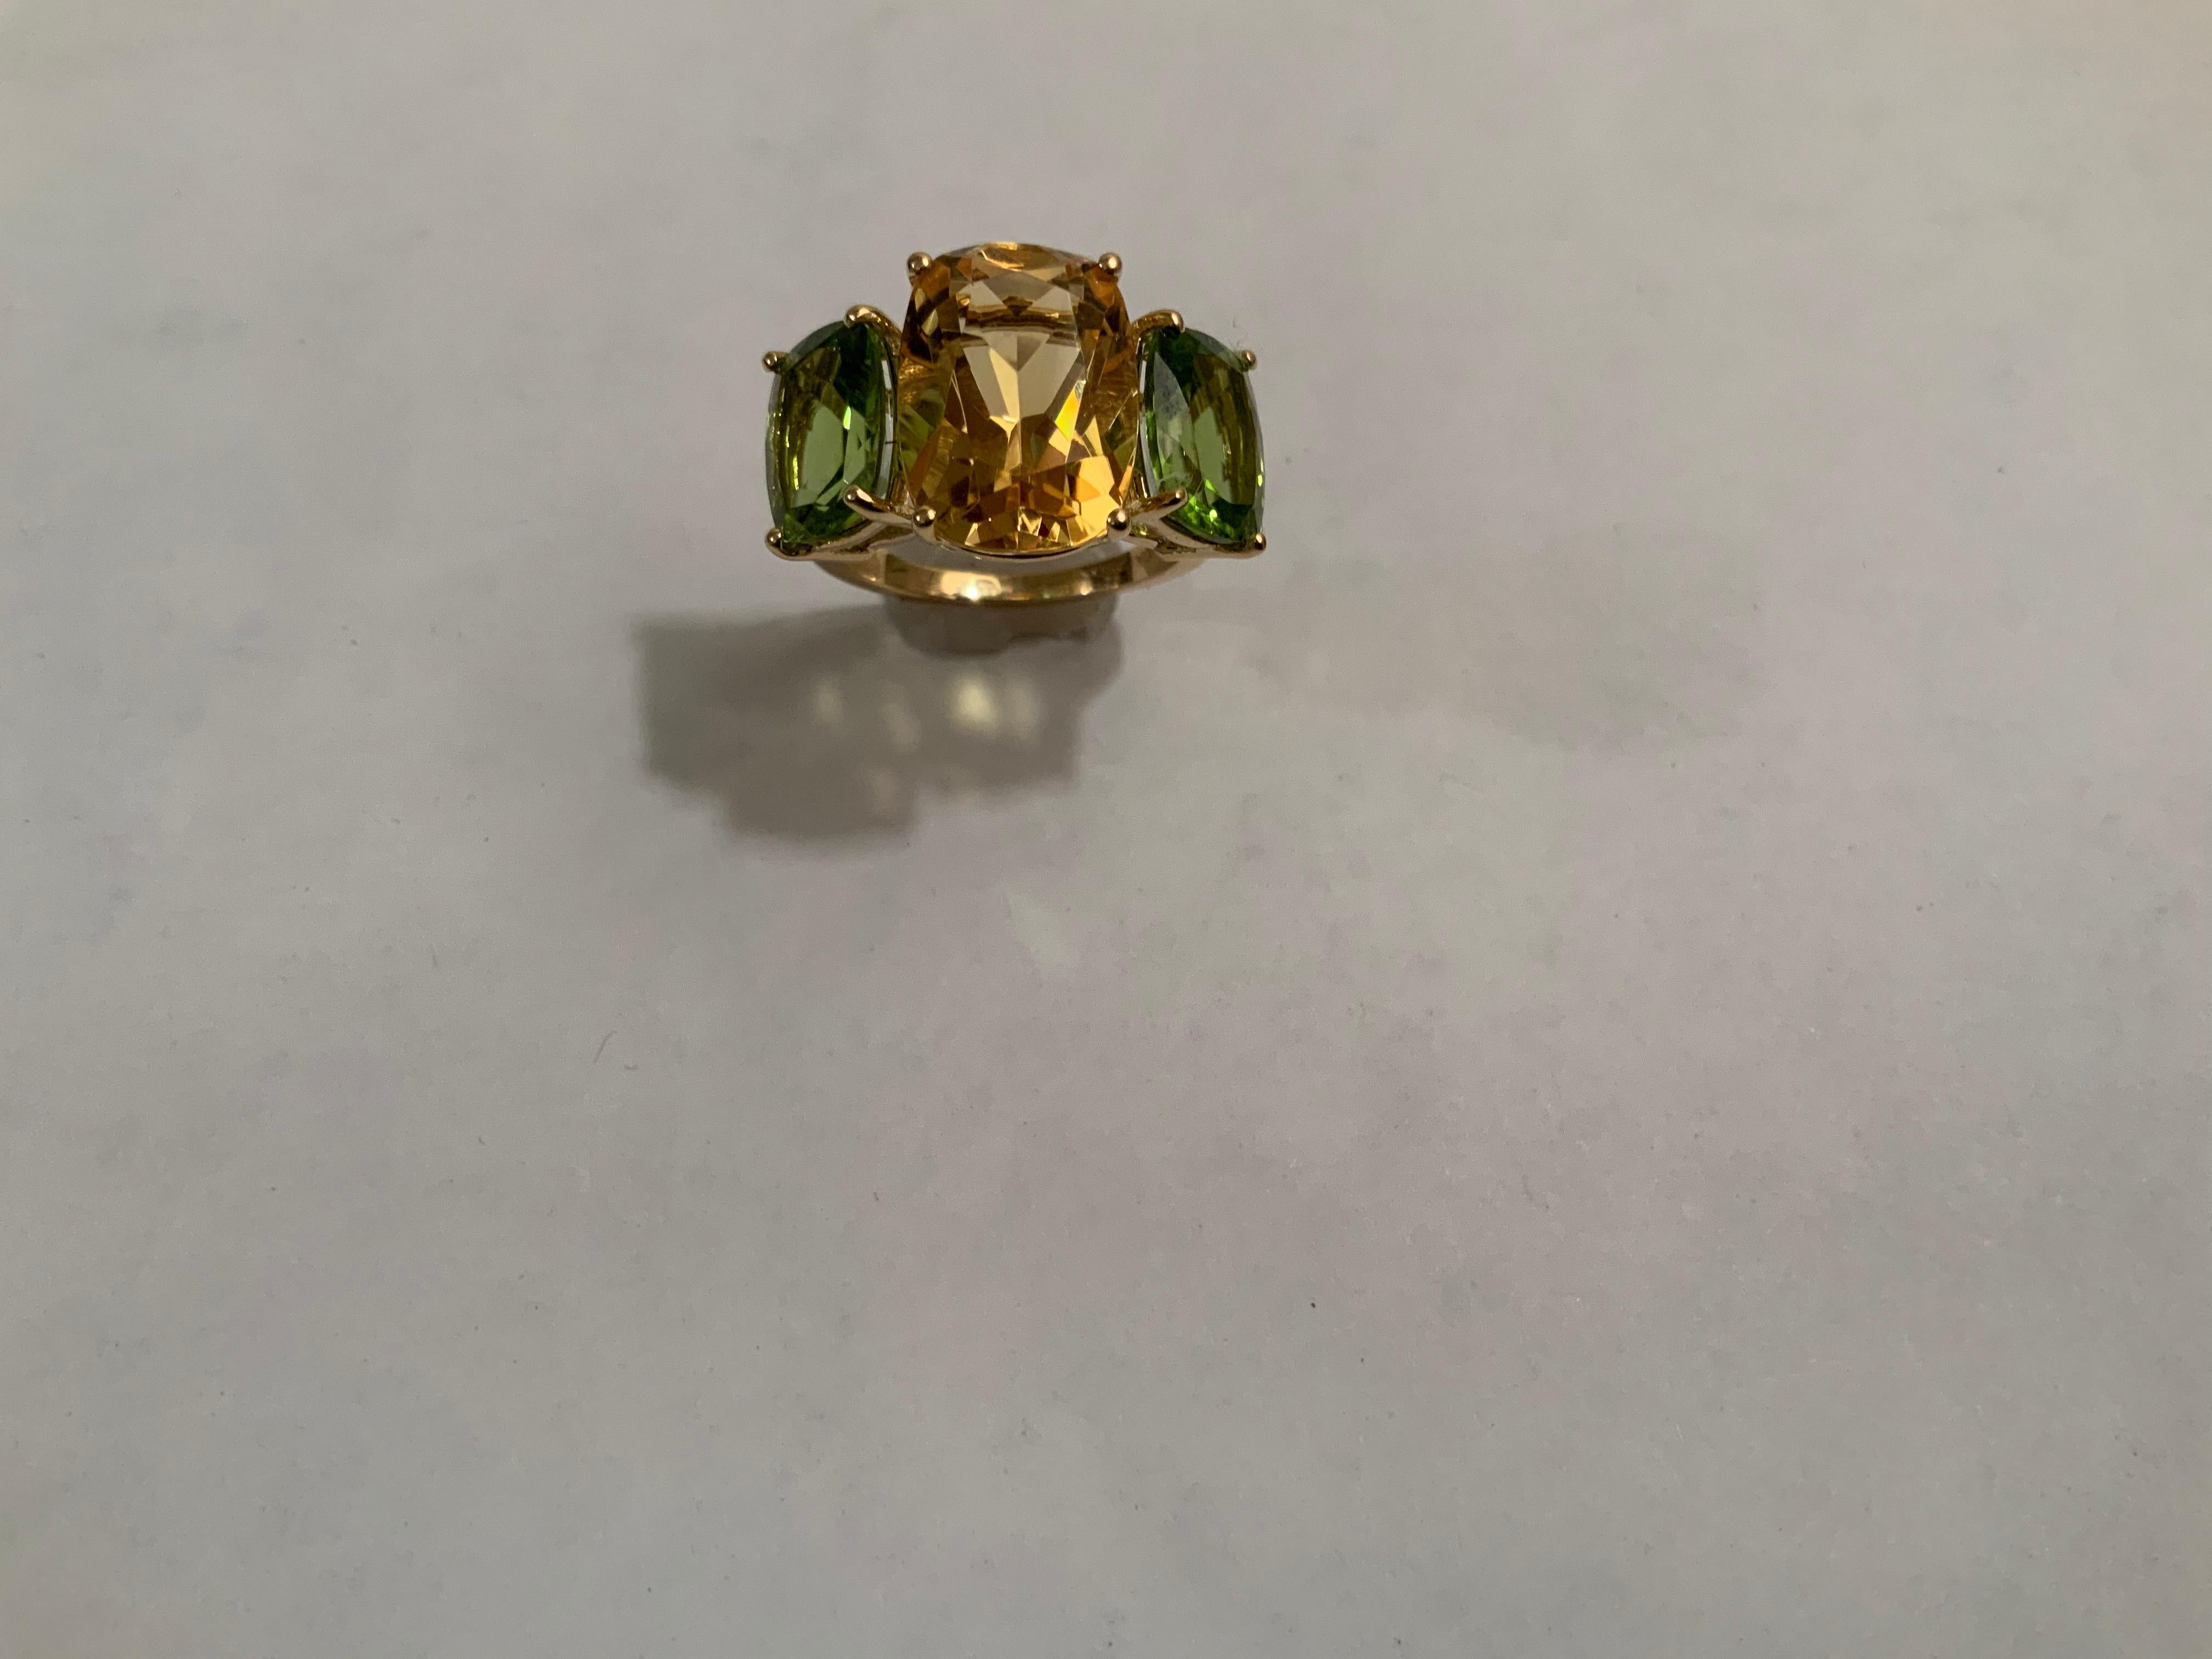 18kt Yellow Gold Three Stone faceted Cushion Cut Ring with center Citrine and Peridot finished with a tapered split shank.

This elegant cocktail ring measures 1 1/4